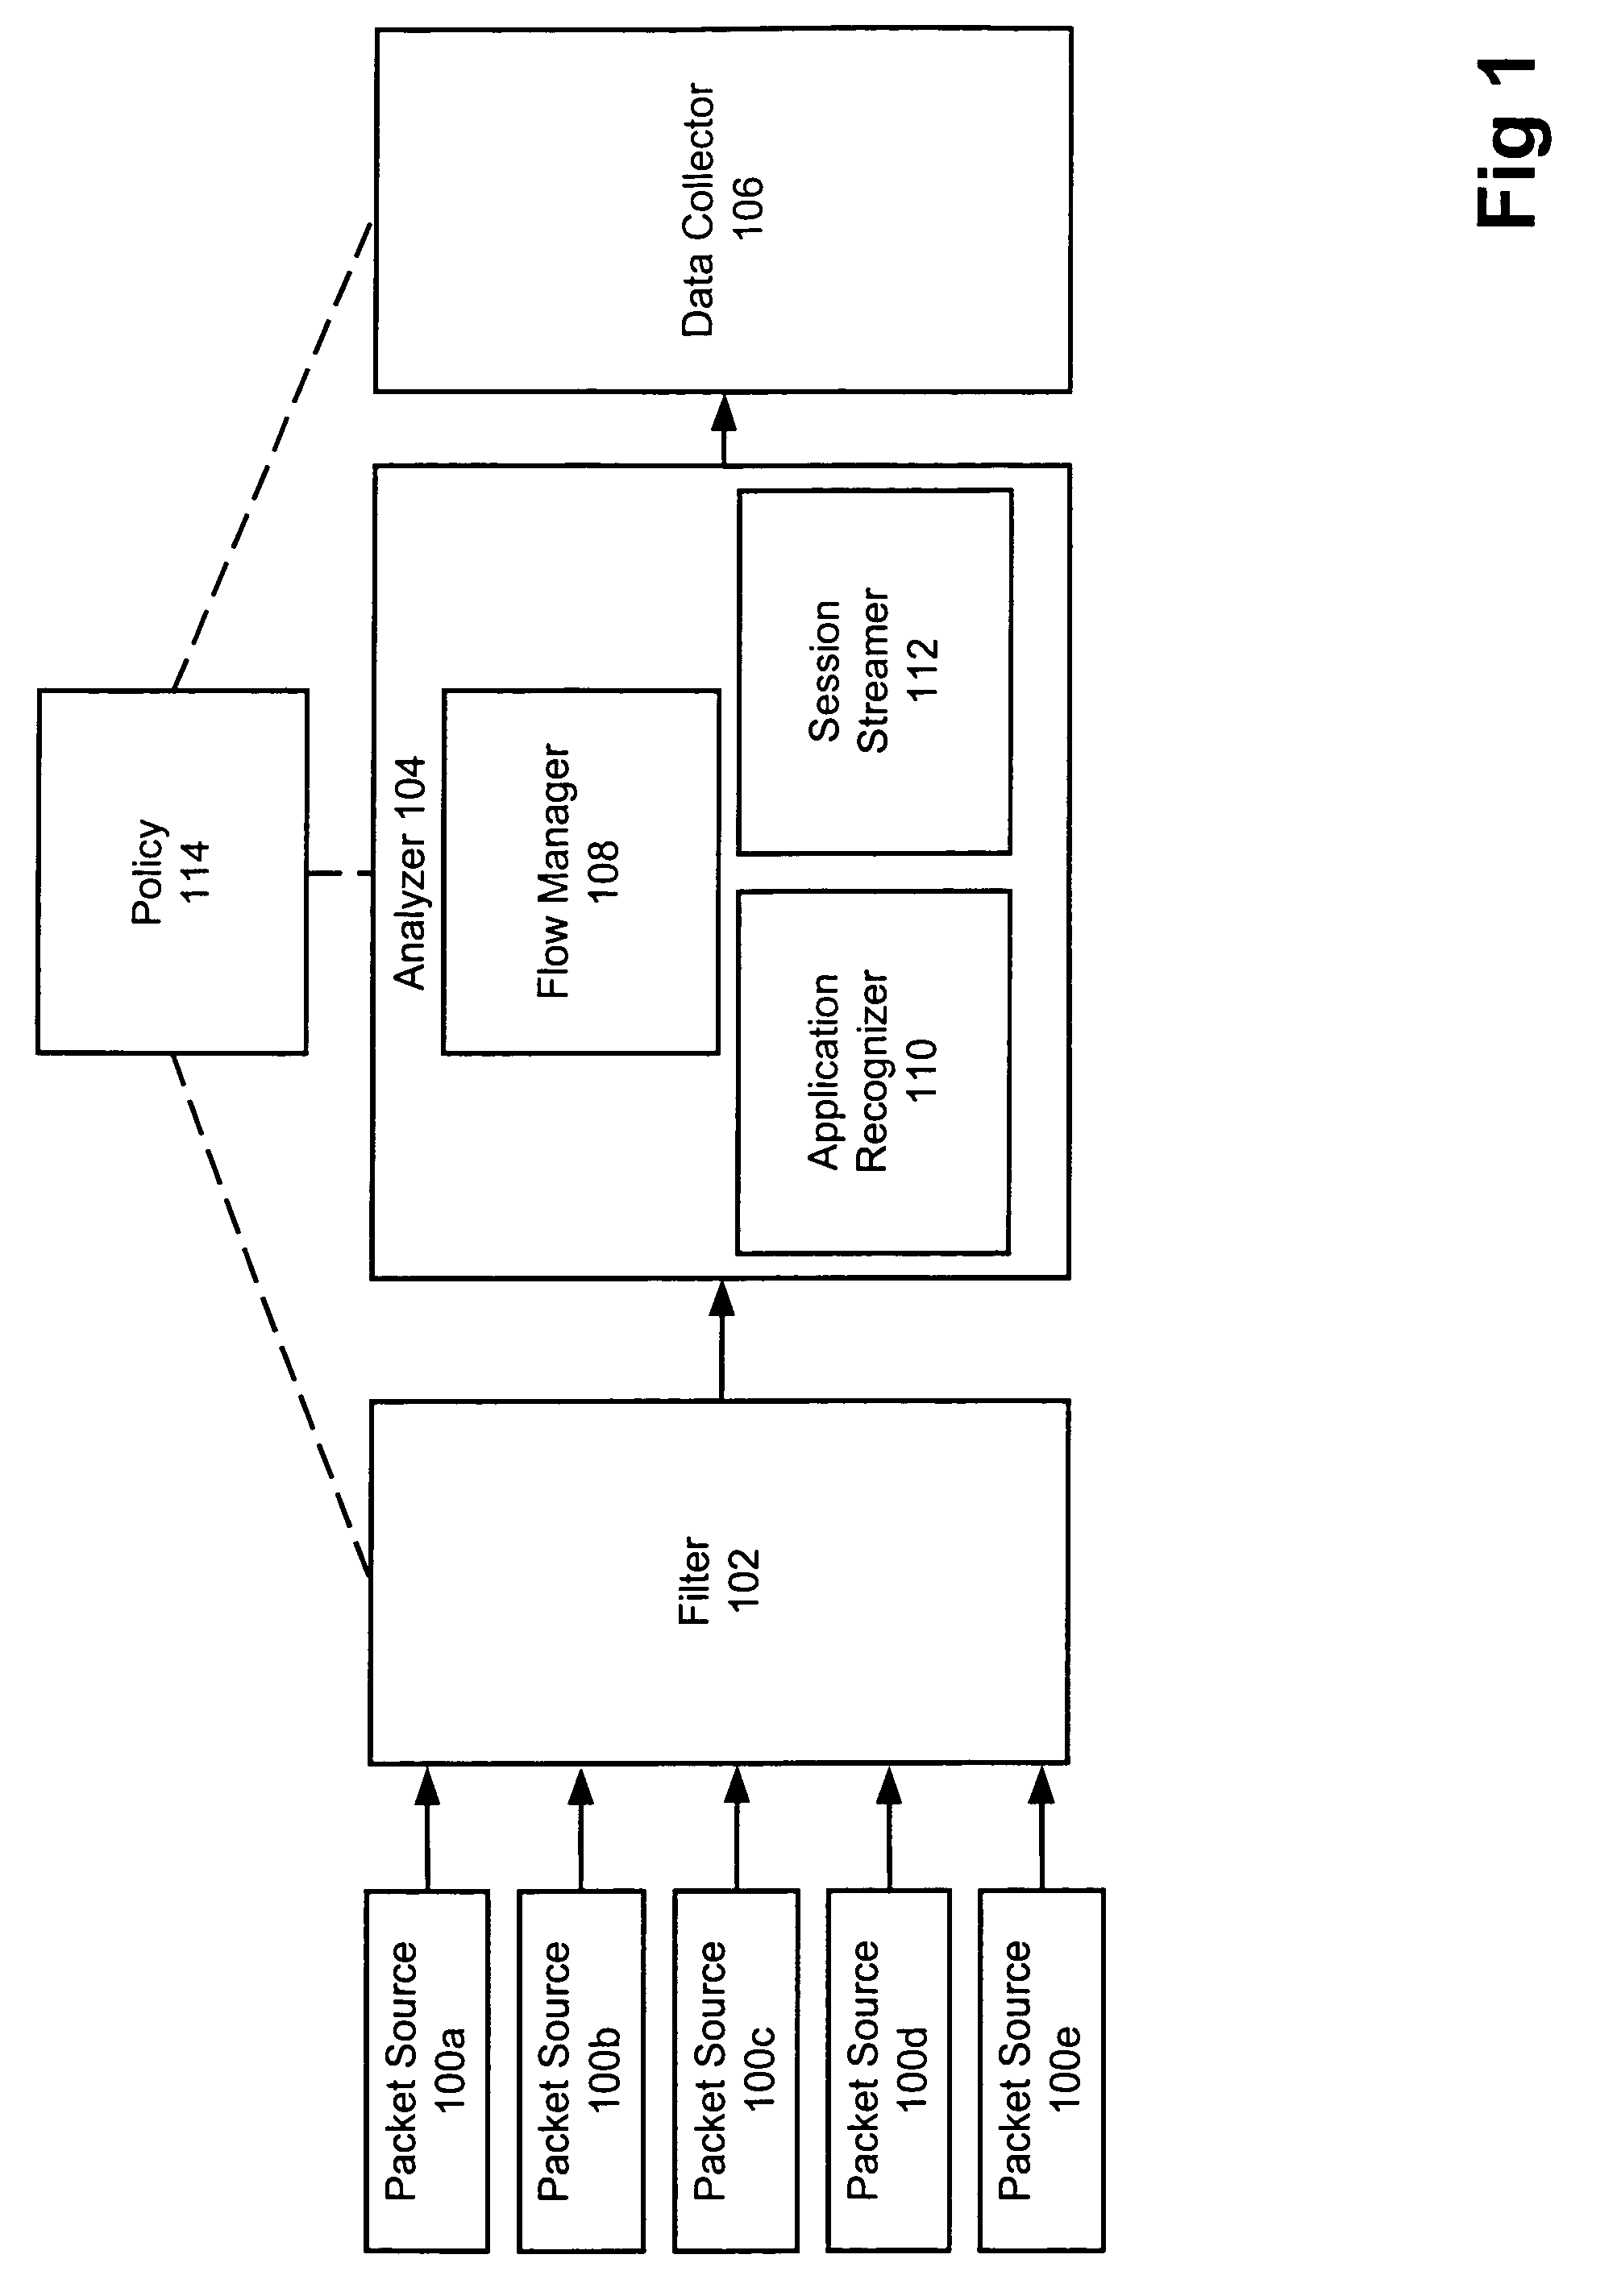 Method and apparatus for session reconstruction and accounting involving VoIP calls